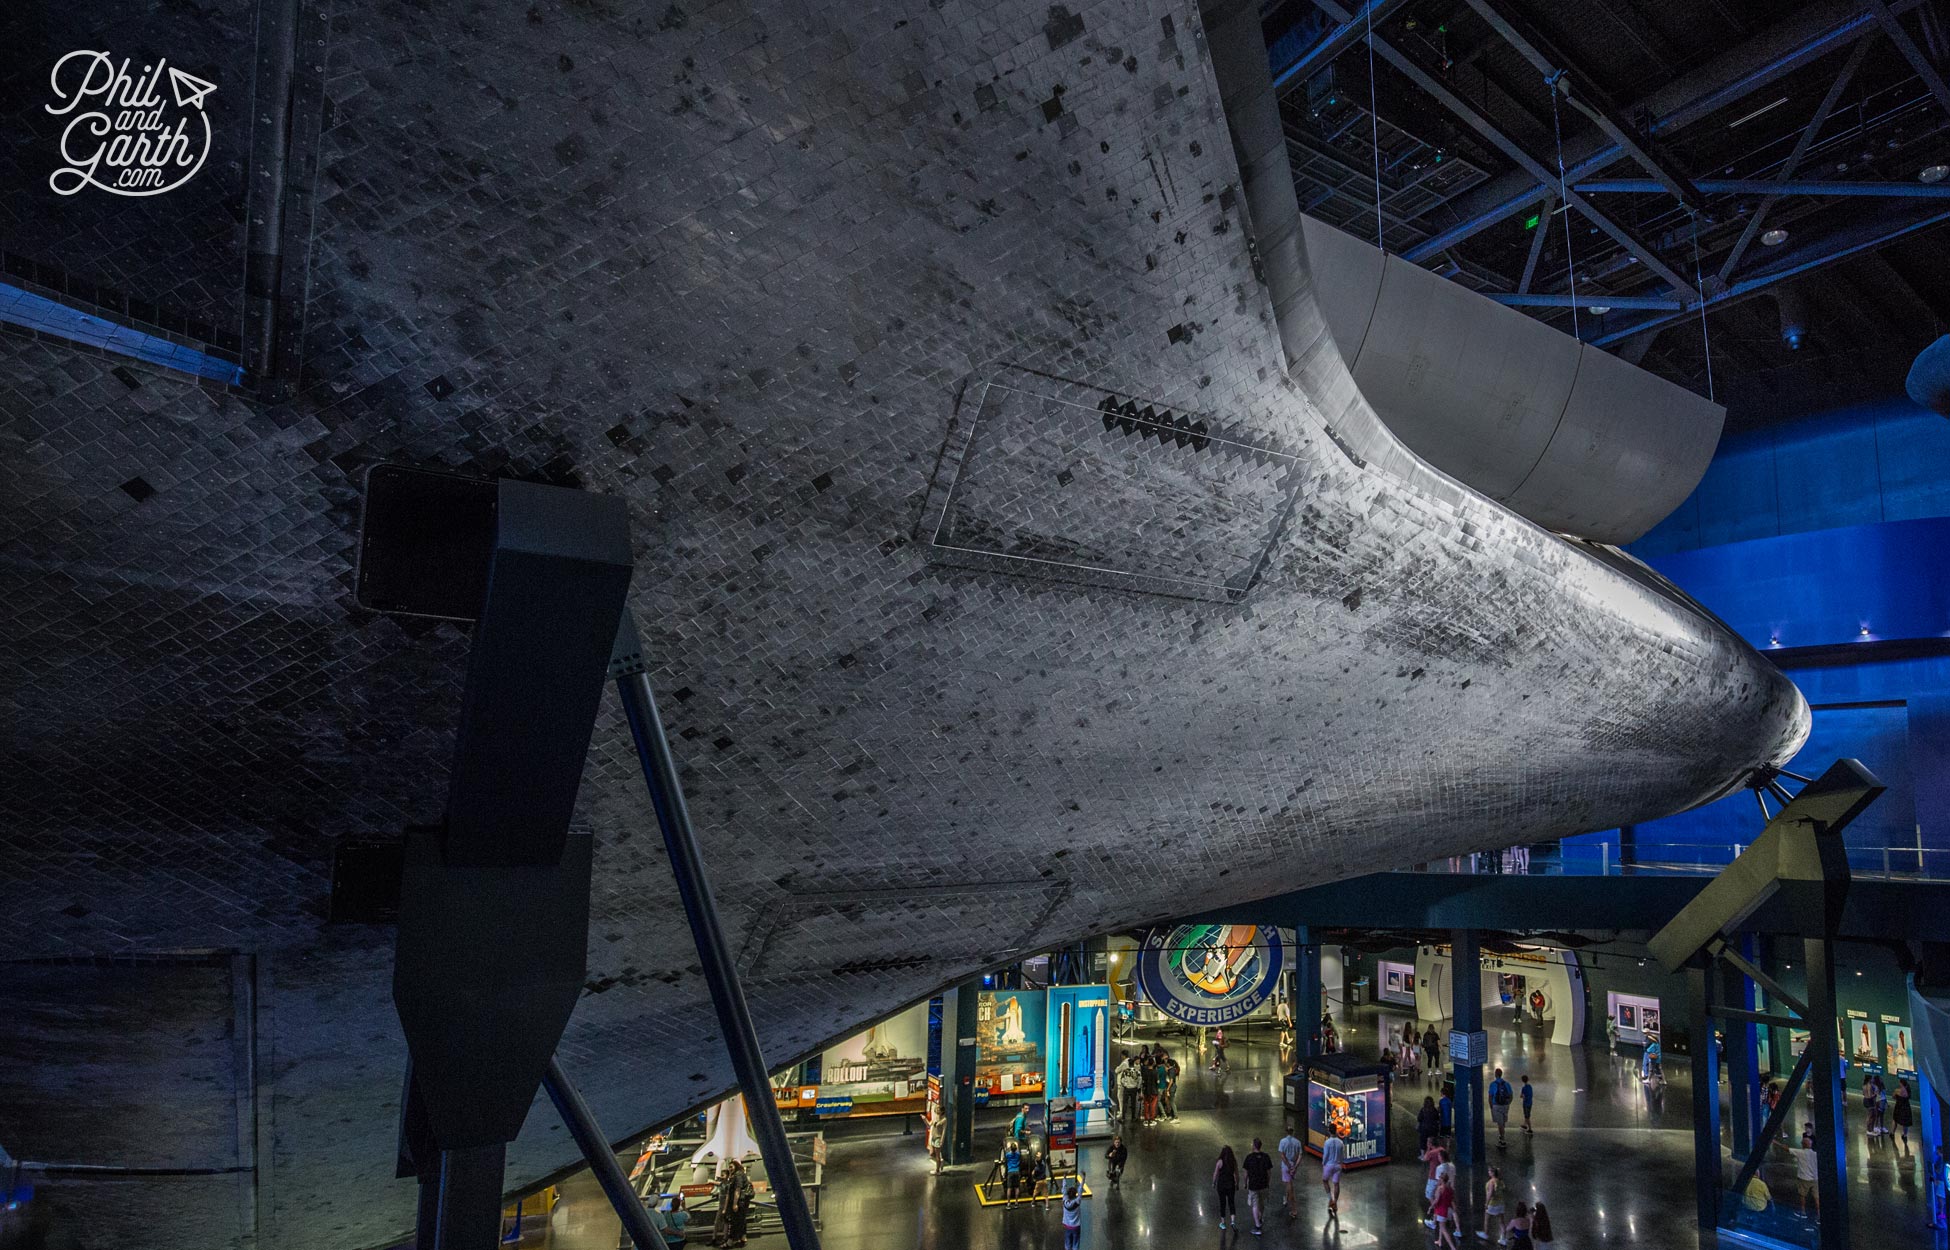 Underside of Atlantis is covered in black tiles to protect against ultra high temperatures